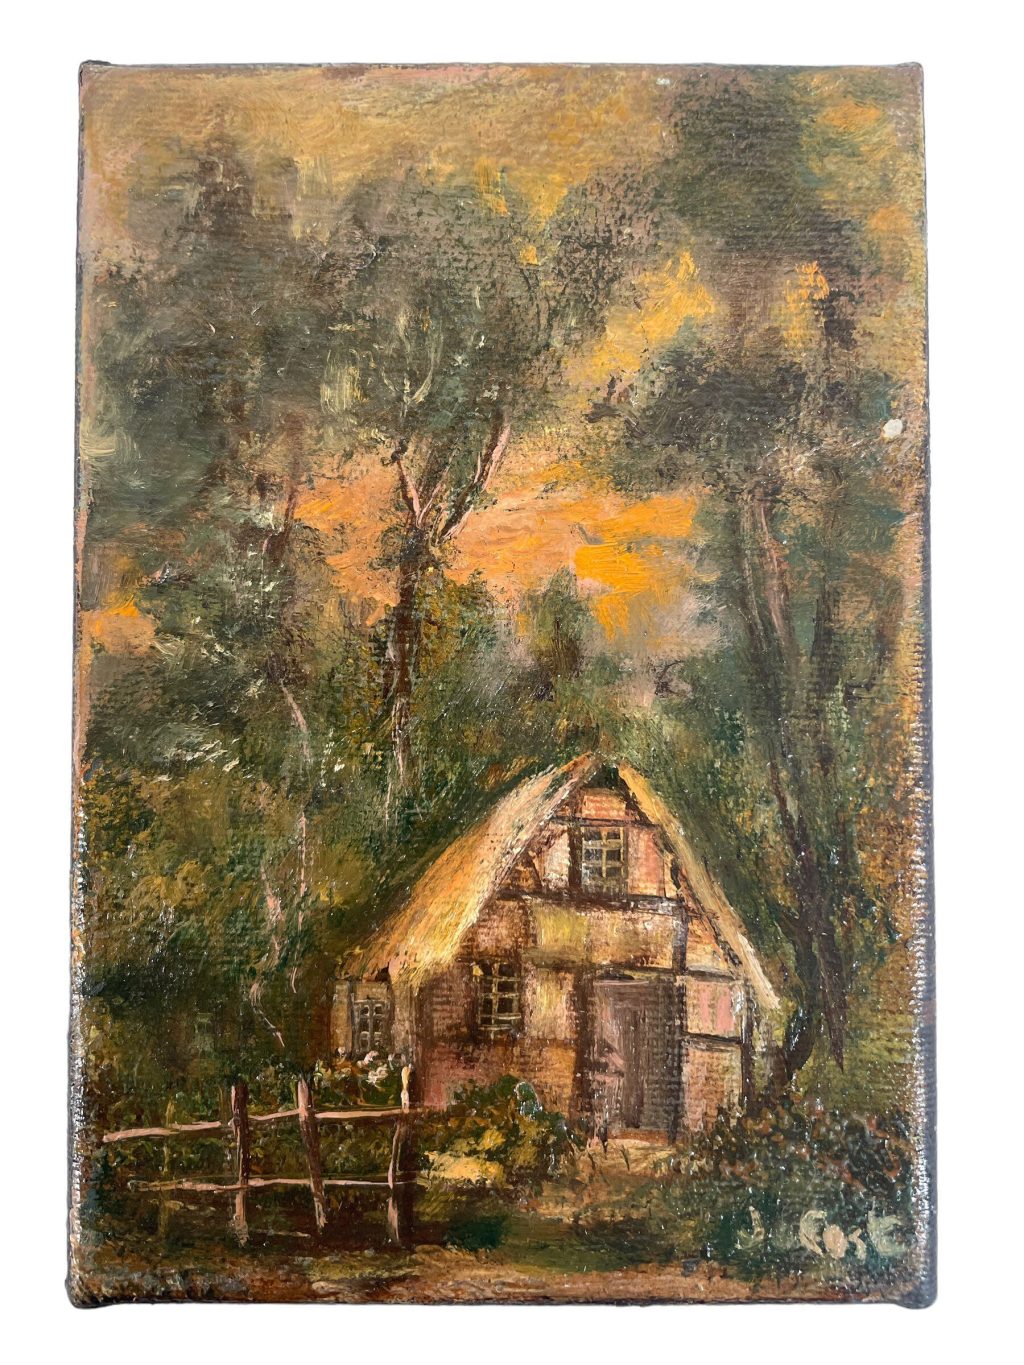 Antique French Small Tiny House in Woods “Watched Over” Oil Painting On Wood Board Wall Decor Decoration c1900’s